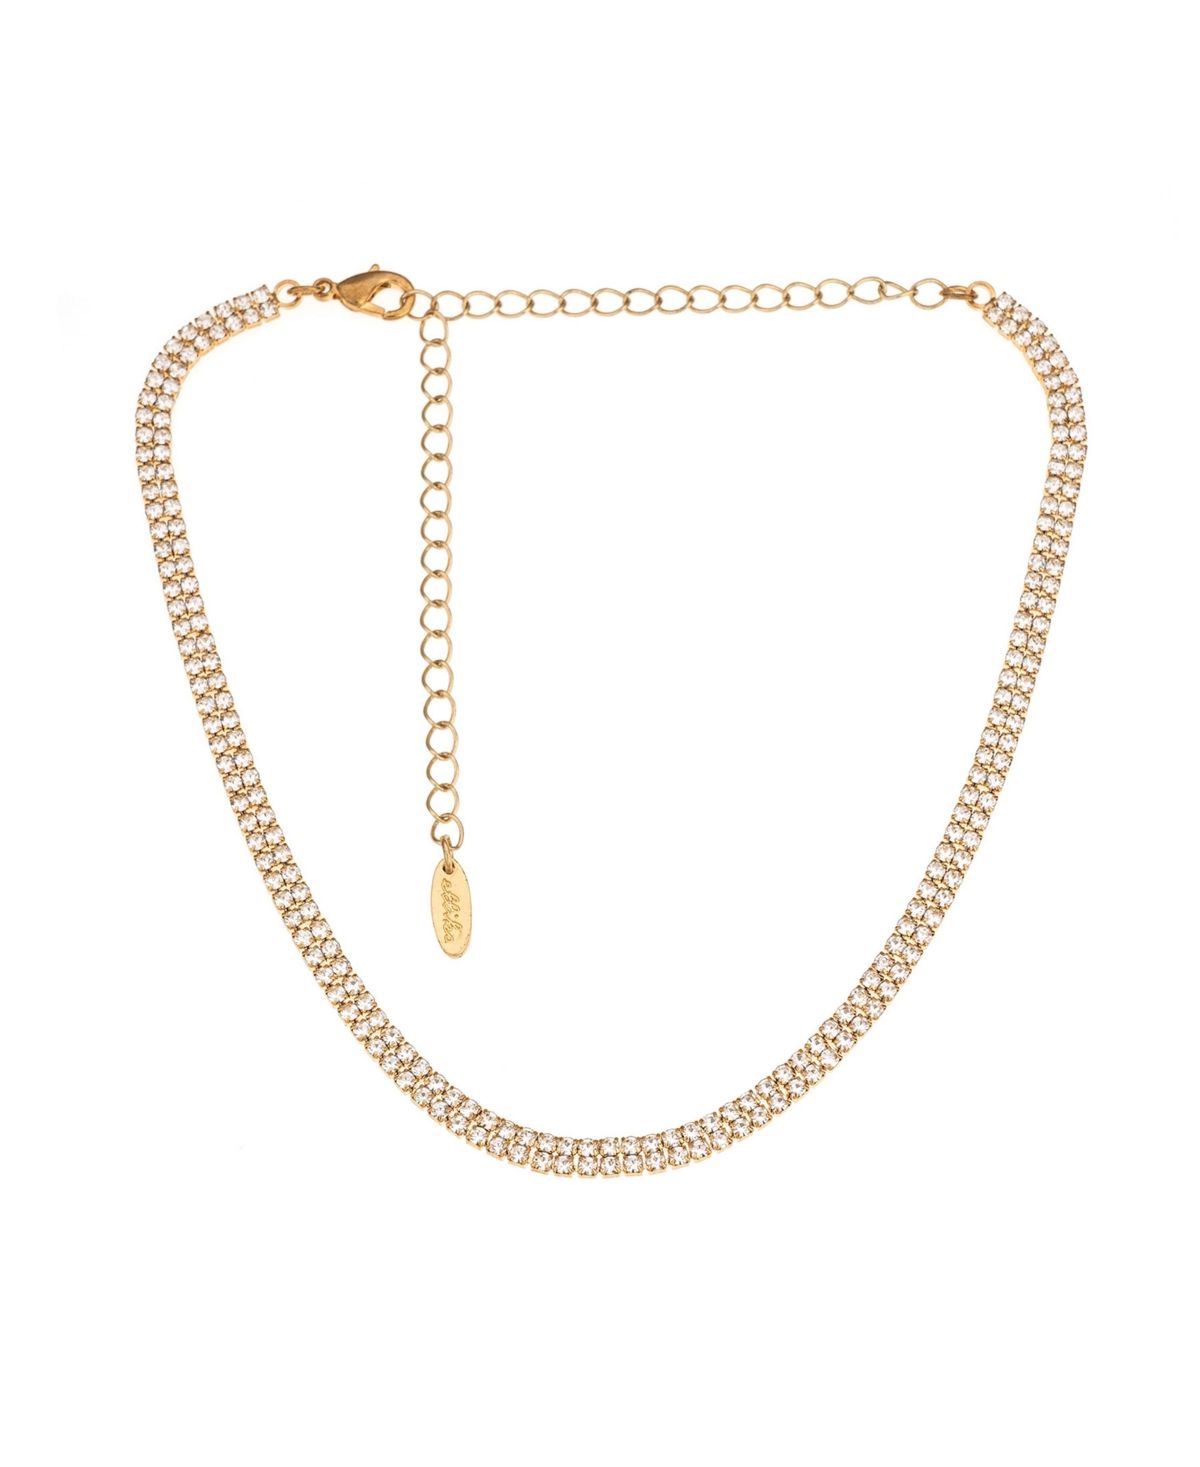 Simplicity 18K Gold Plated Choker Necklace - Gold